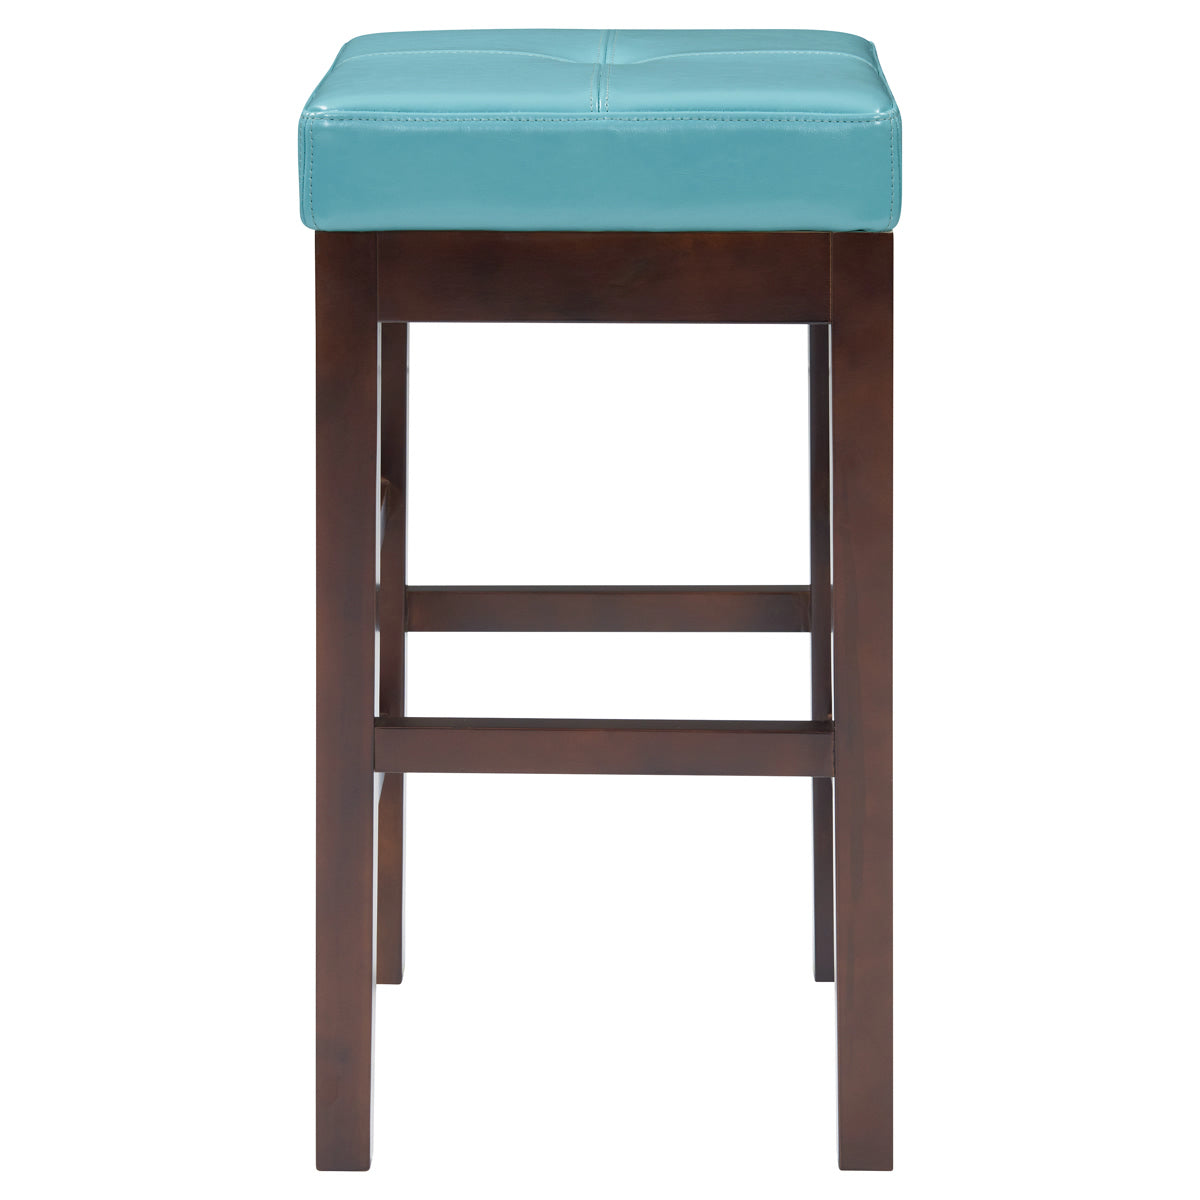 Valencia Backless Bicast Leather Counter Stool by New Pacific Direct - 108627